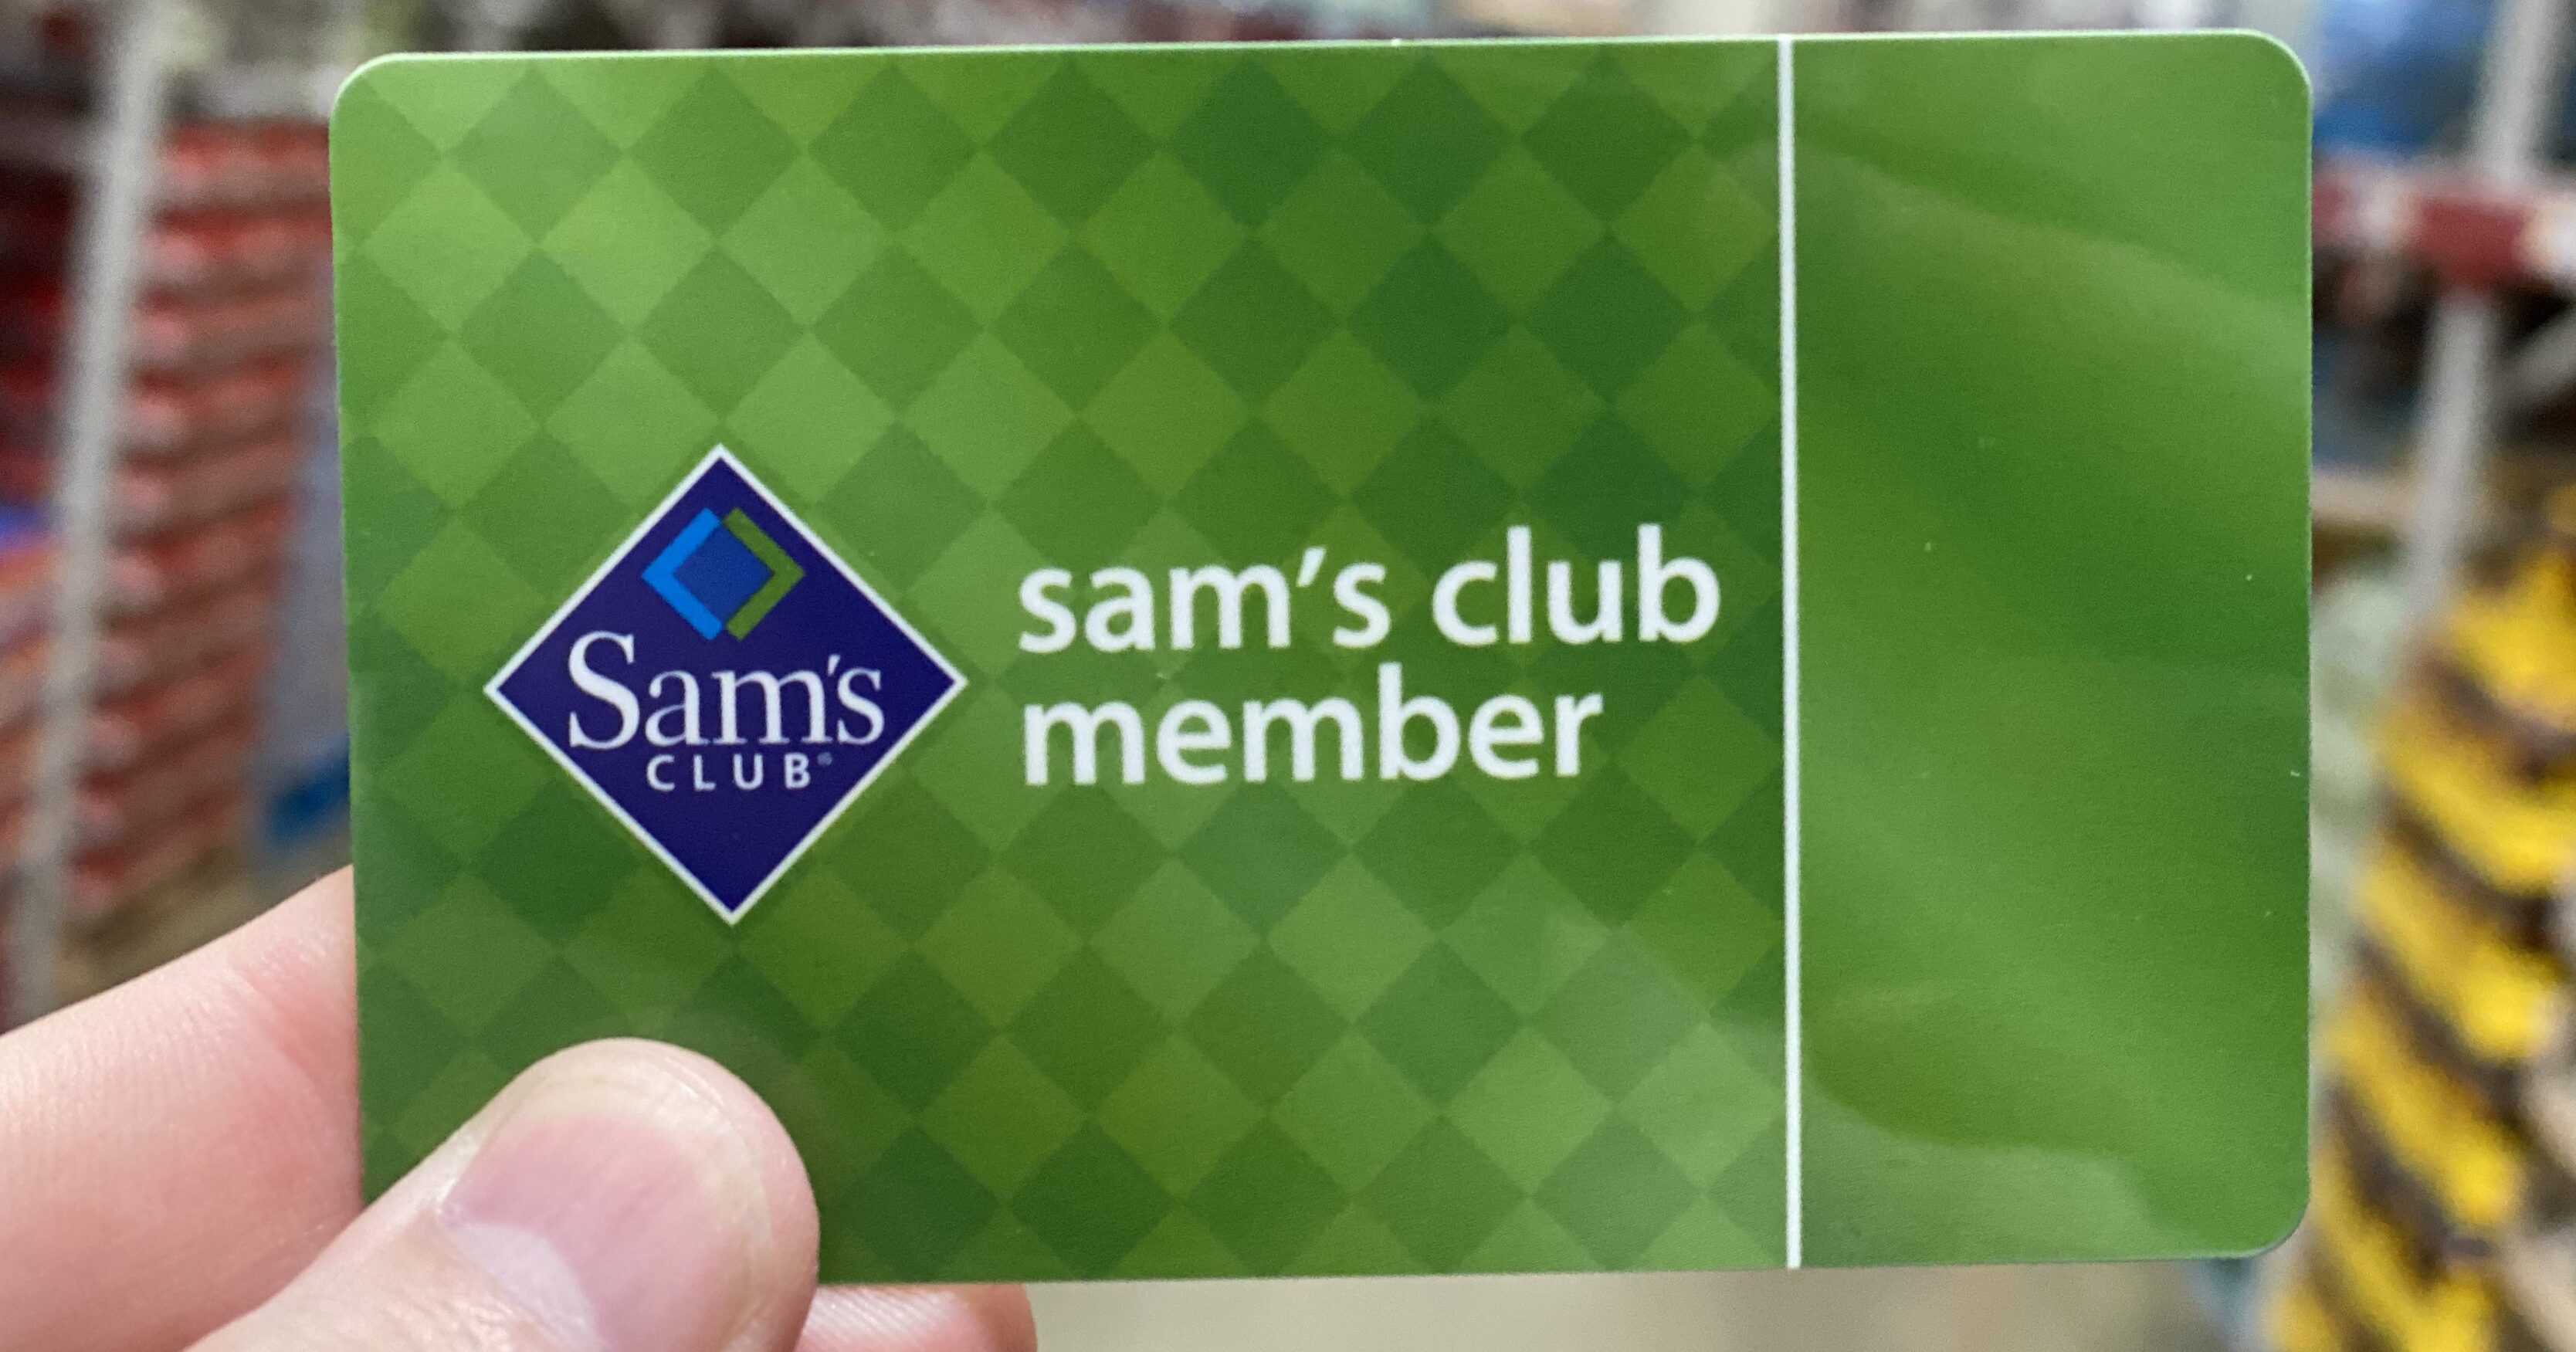 Groupon - Sam's Club Membership Deal - $25 Off First In-Club Purchase of  $25+ - The Freebie Guy®